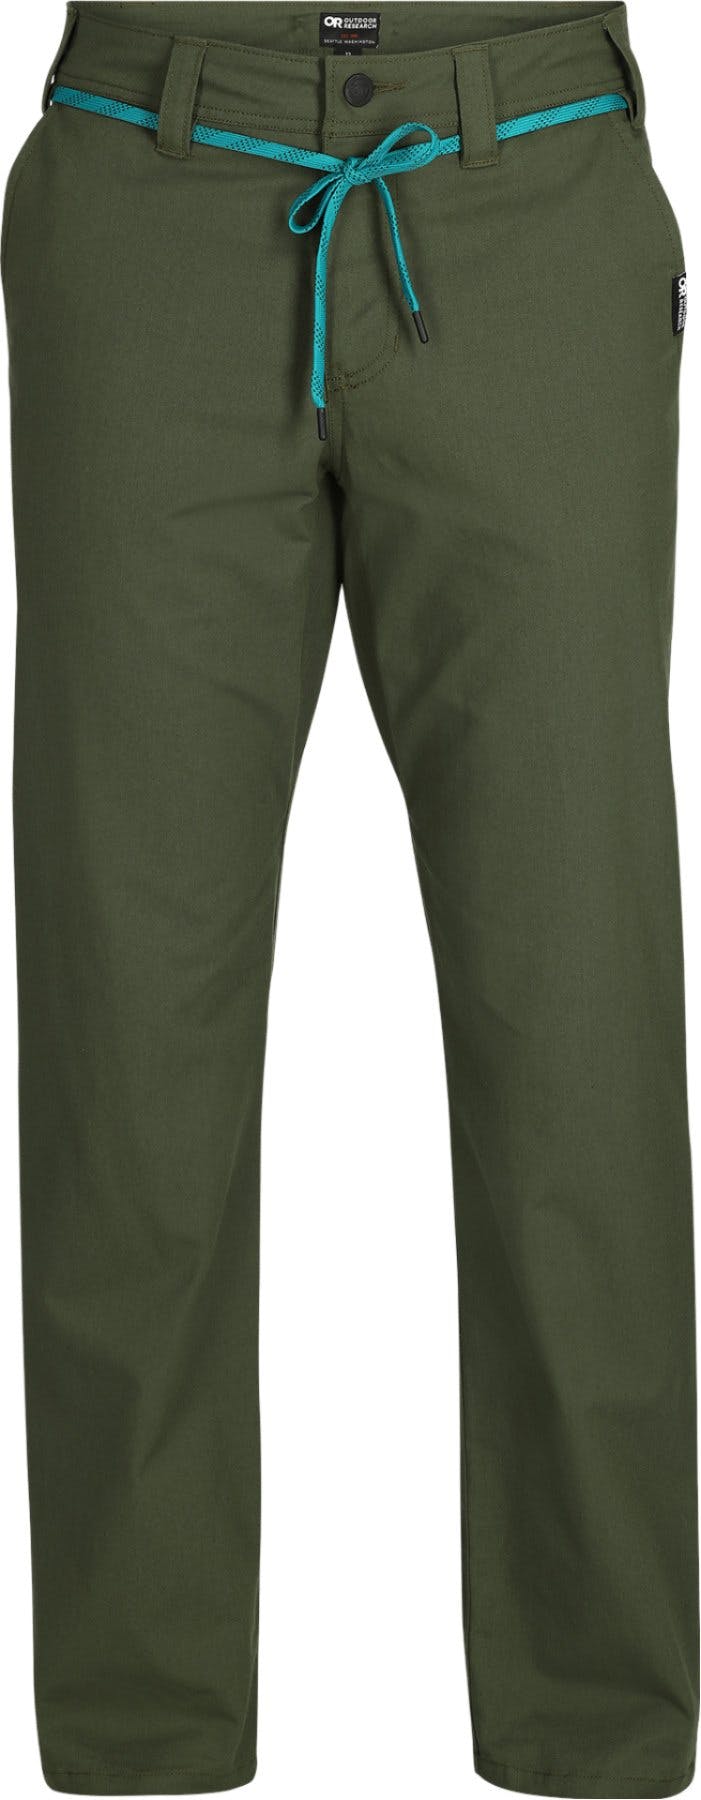 Product image for Canvas Pants 32In - Men's